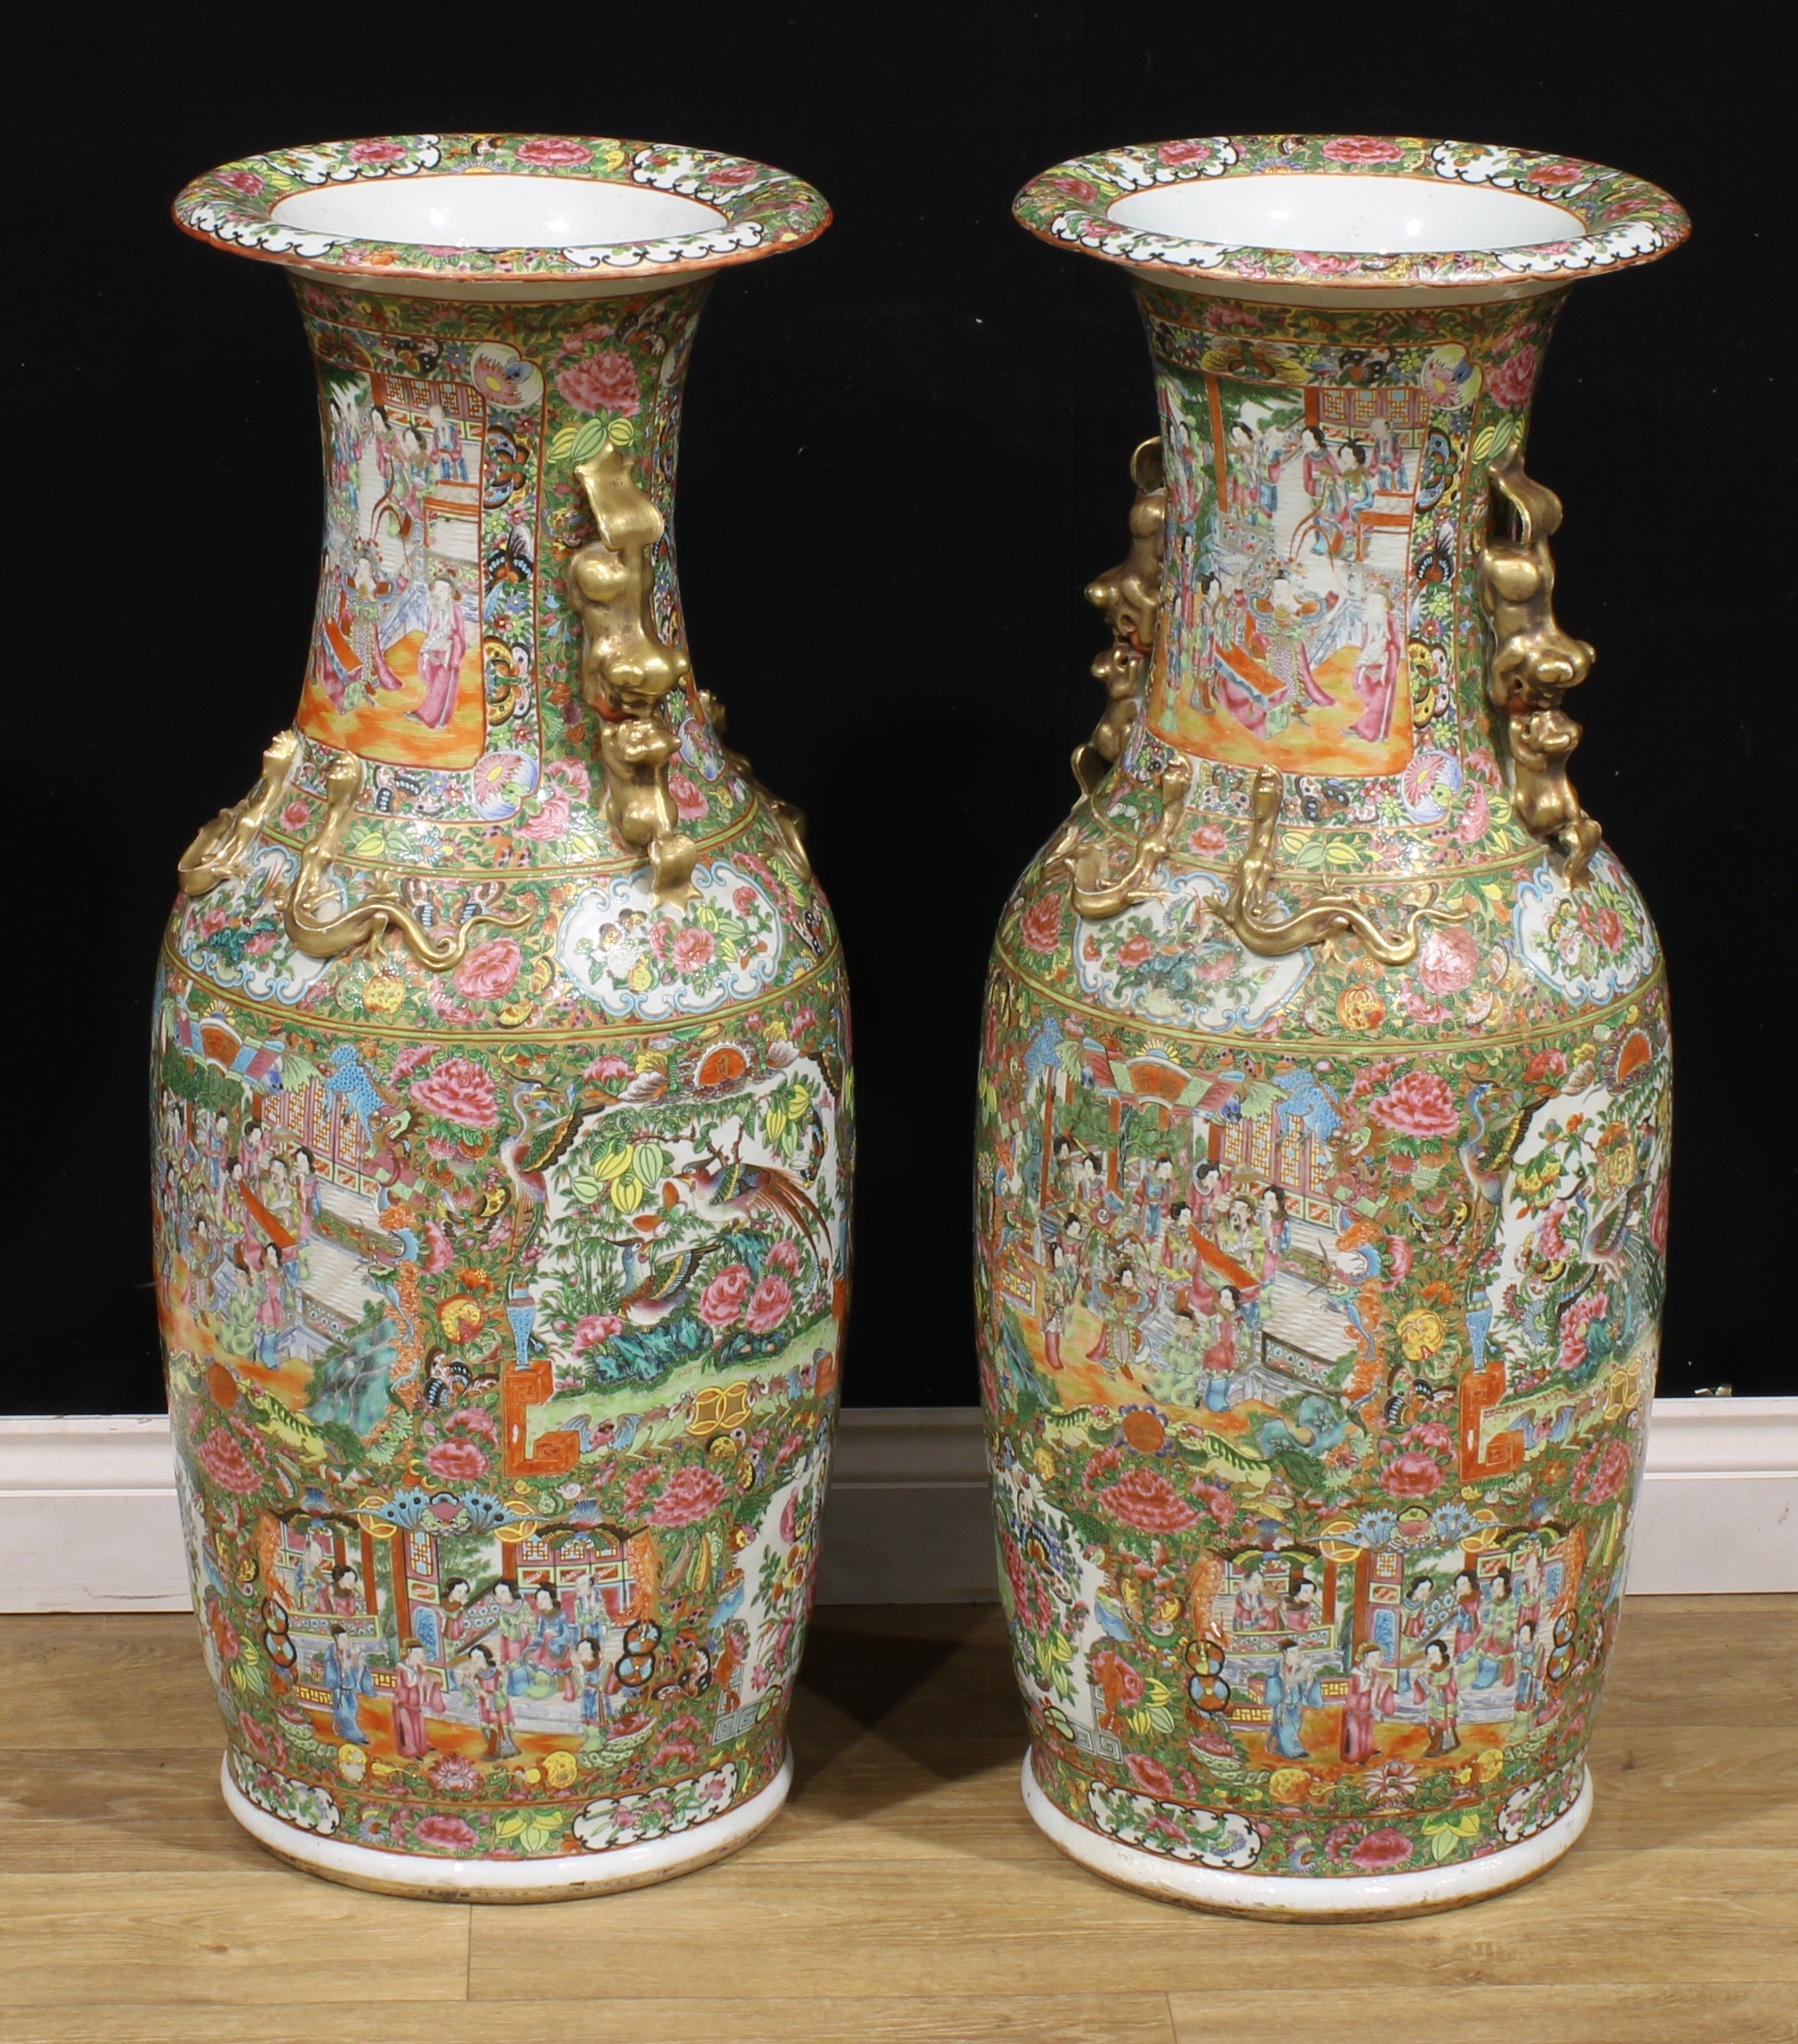 A pair of large Chinese famille rose floor vases, painted in the Cantonese taste with a profusion of - Image 3 of 4